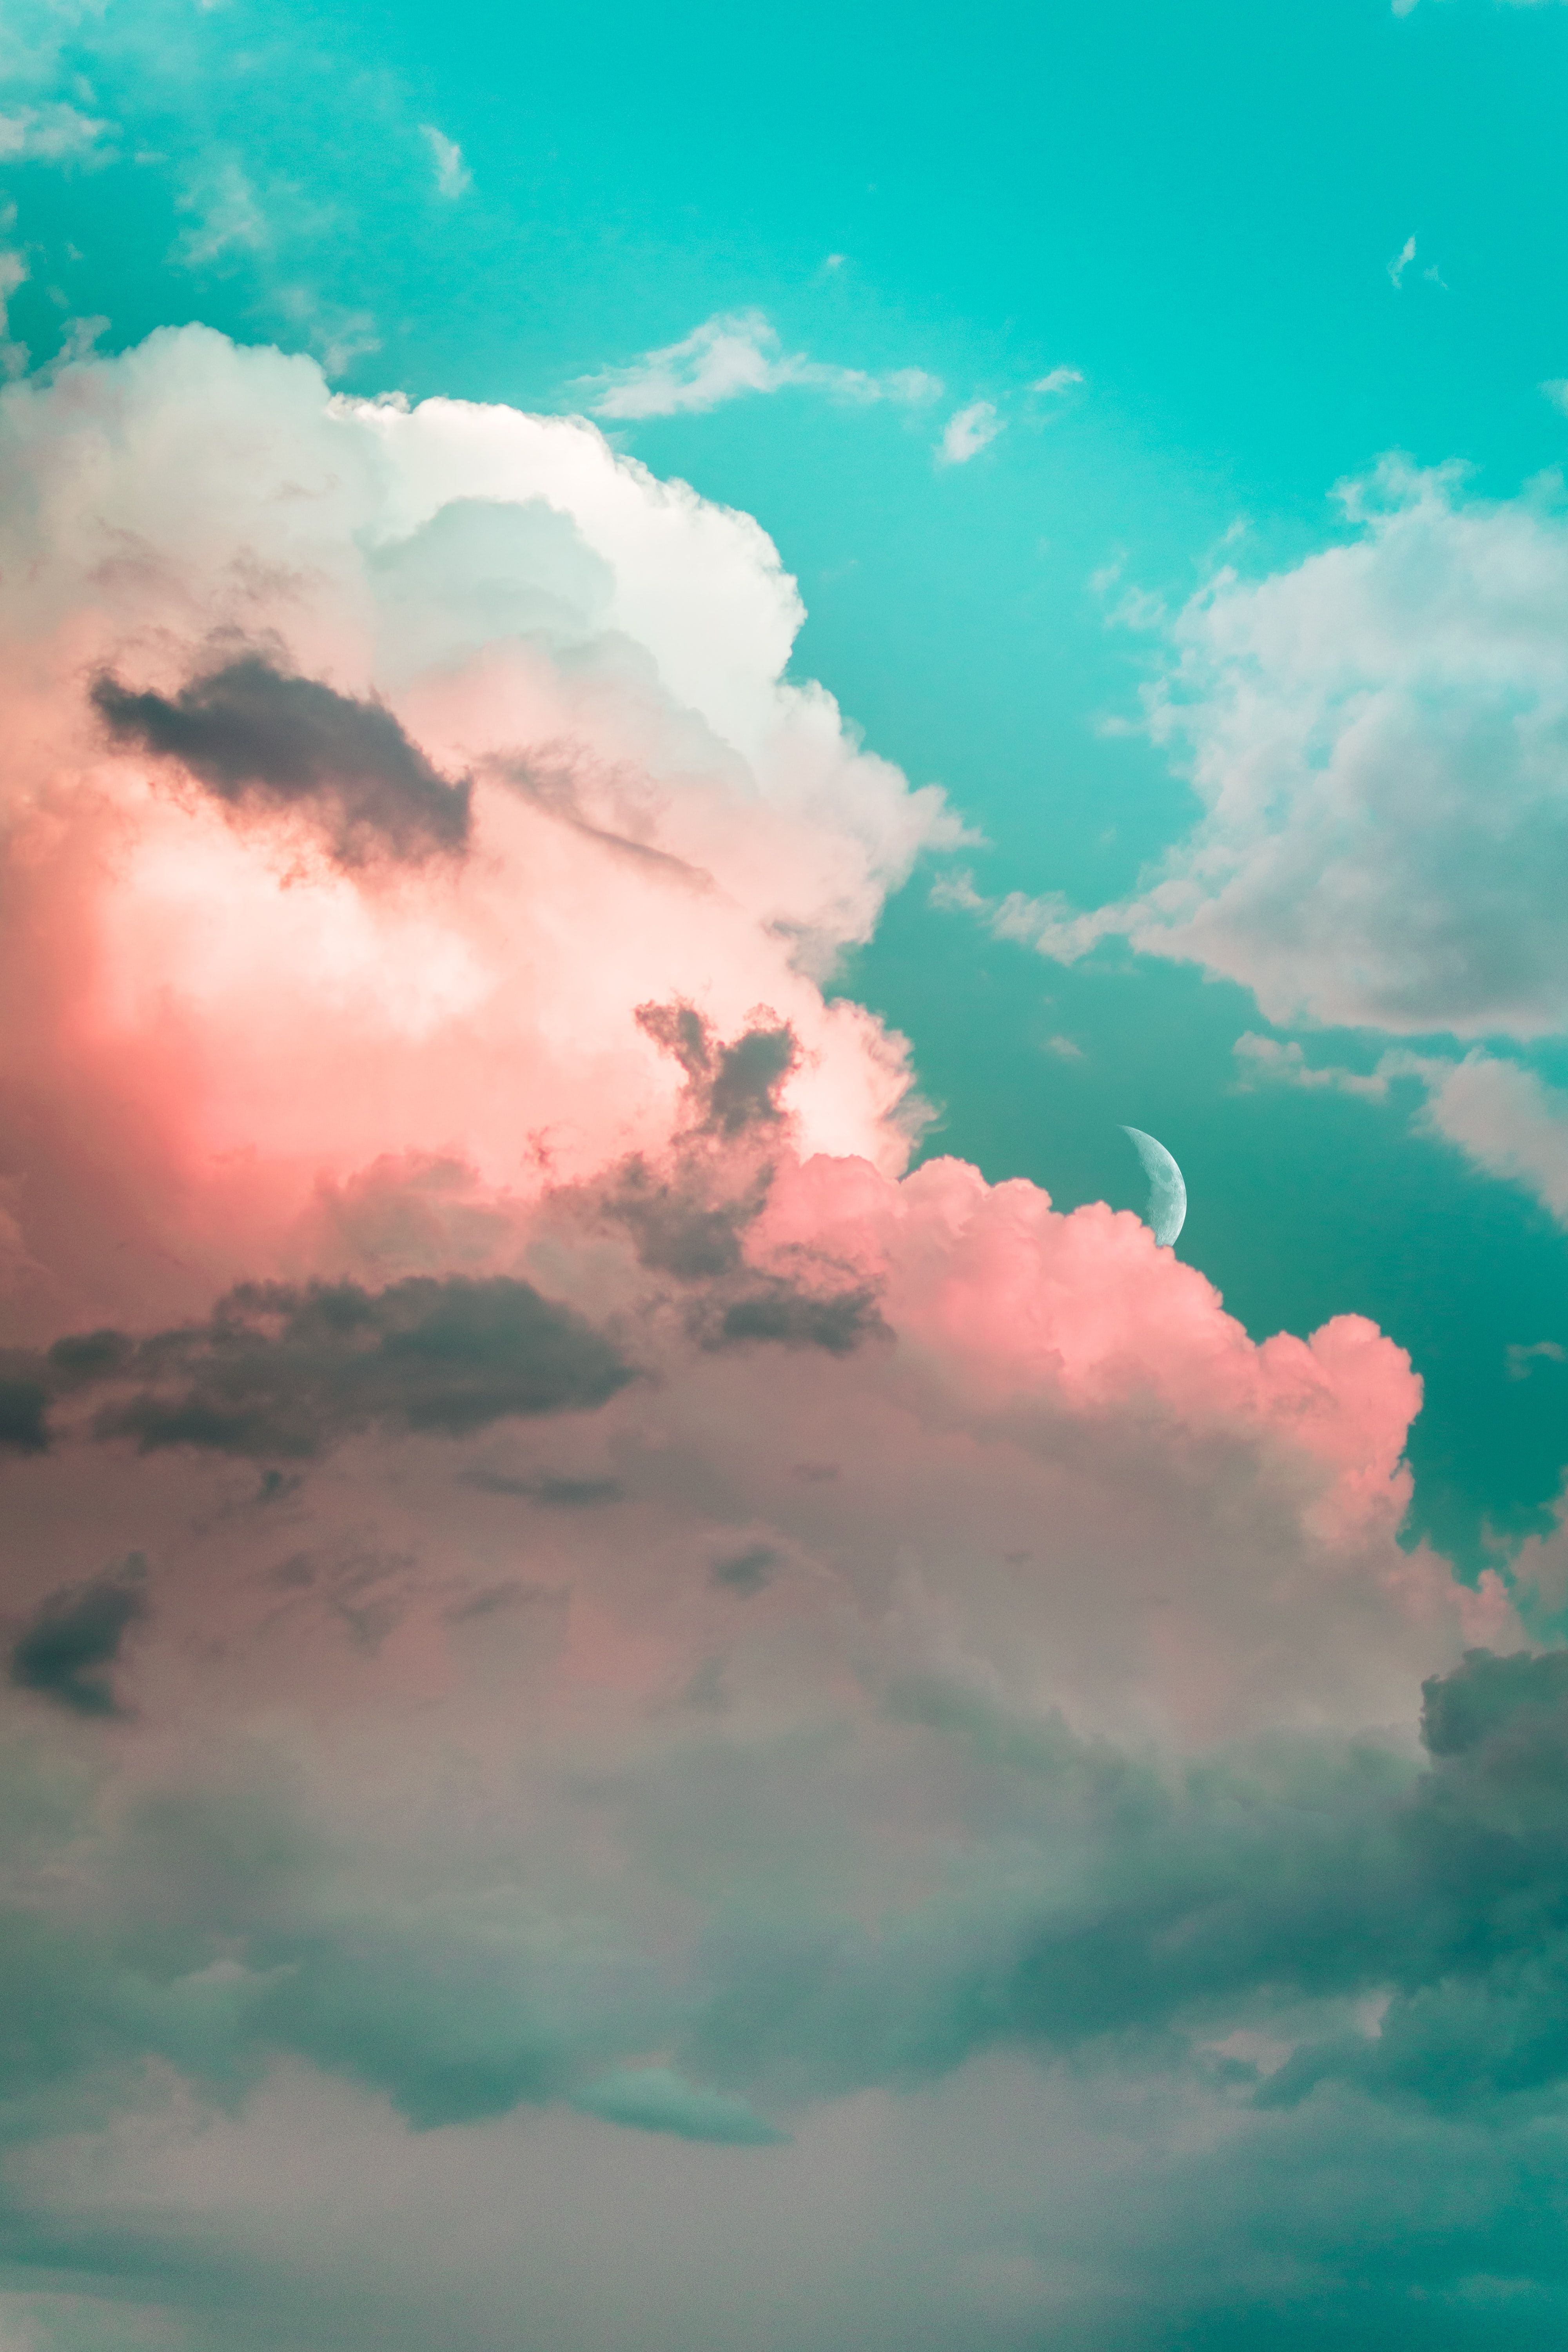 Sky Wallpapers: Free HD Download [500+ HQ]